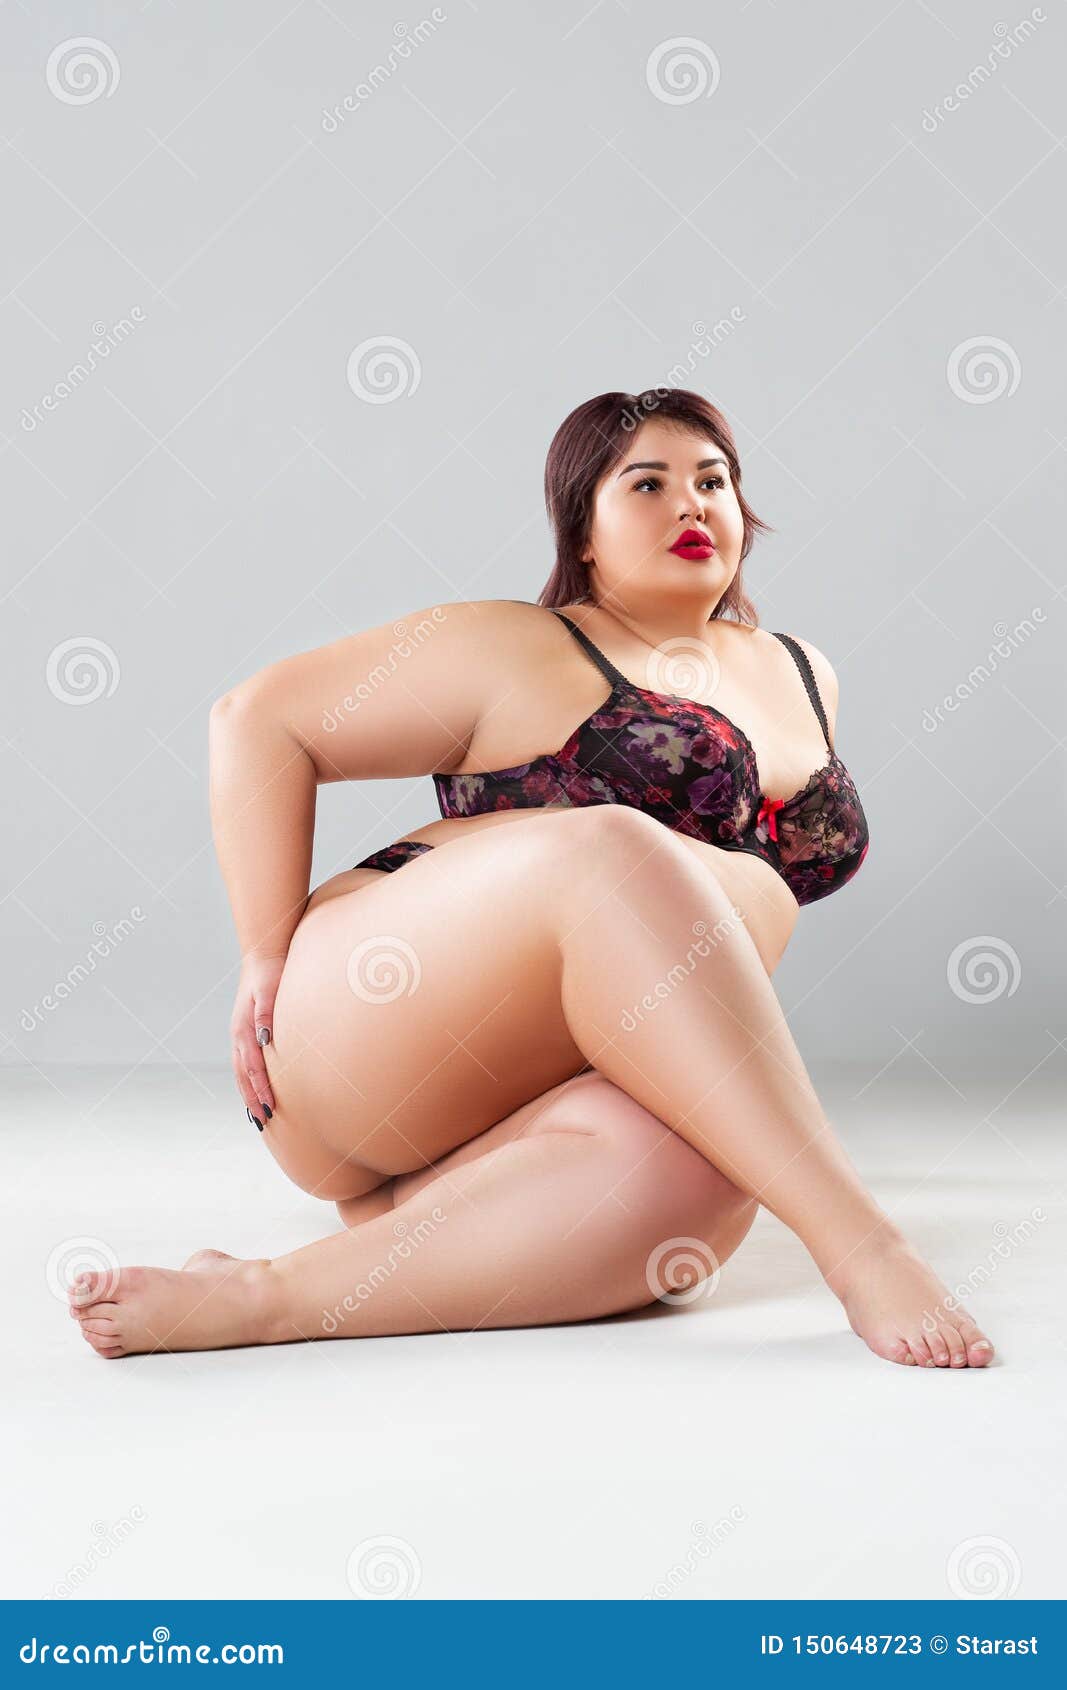 Plus Size Model in Lingerie, Fat Woman in Underwear on Gray Background, Body Positive Concept Stock Image